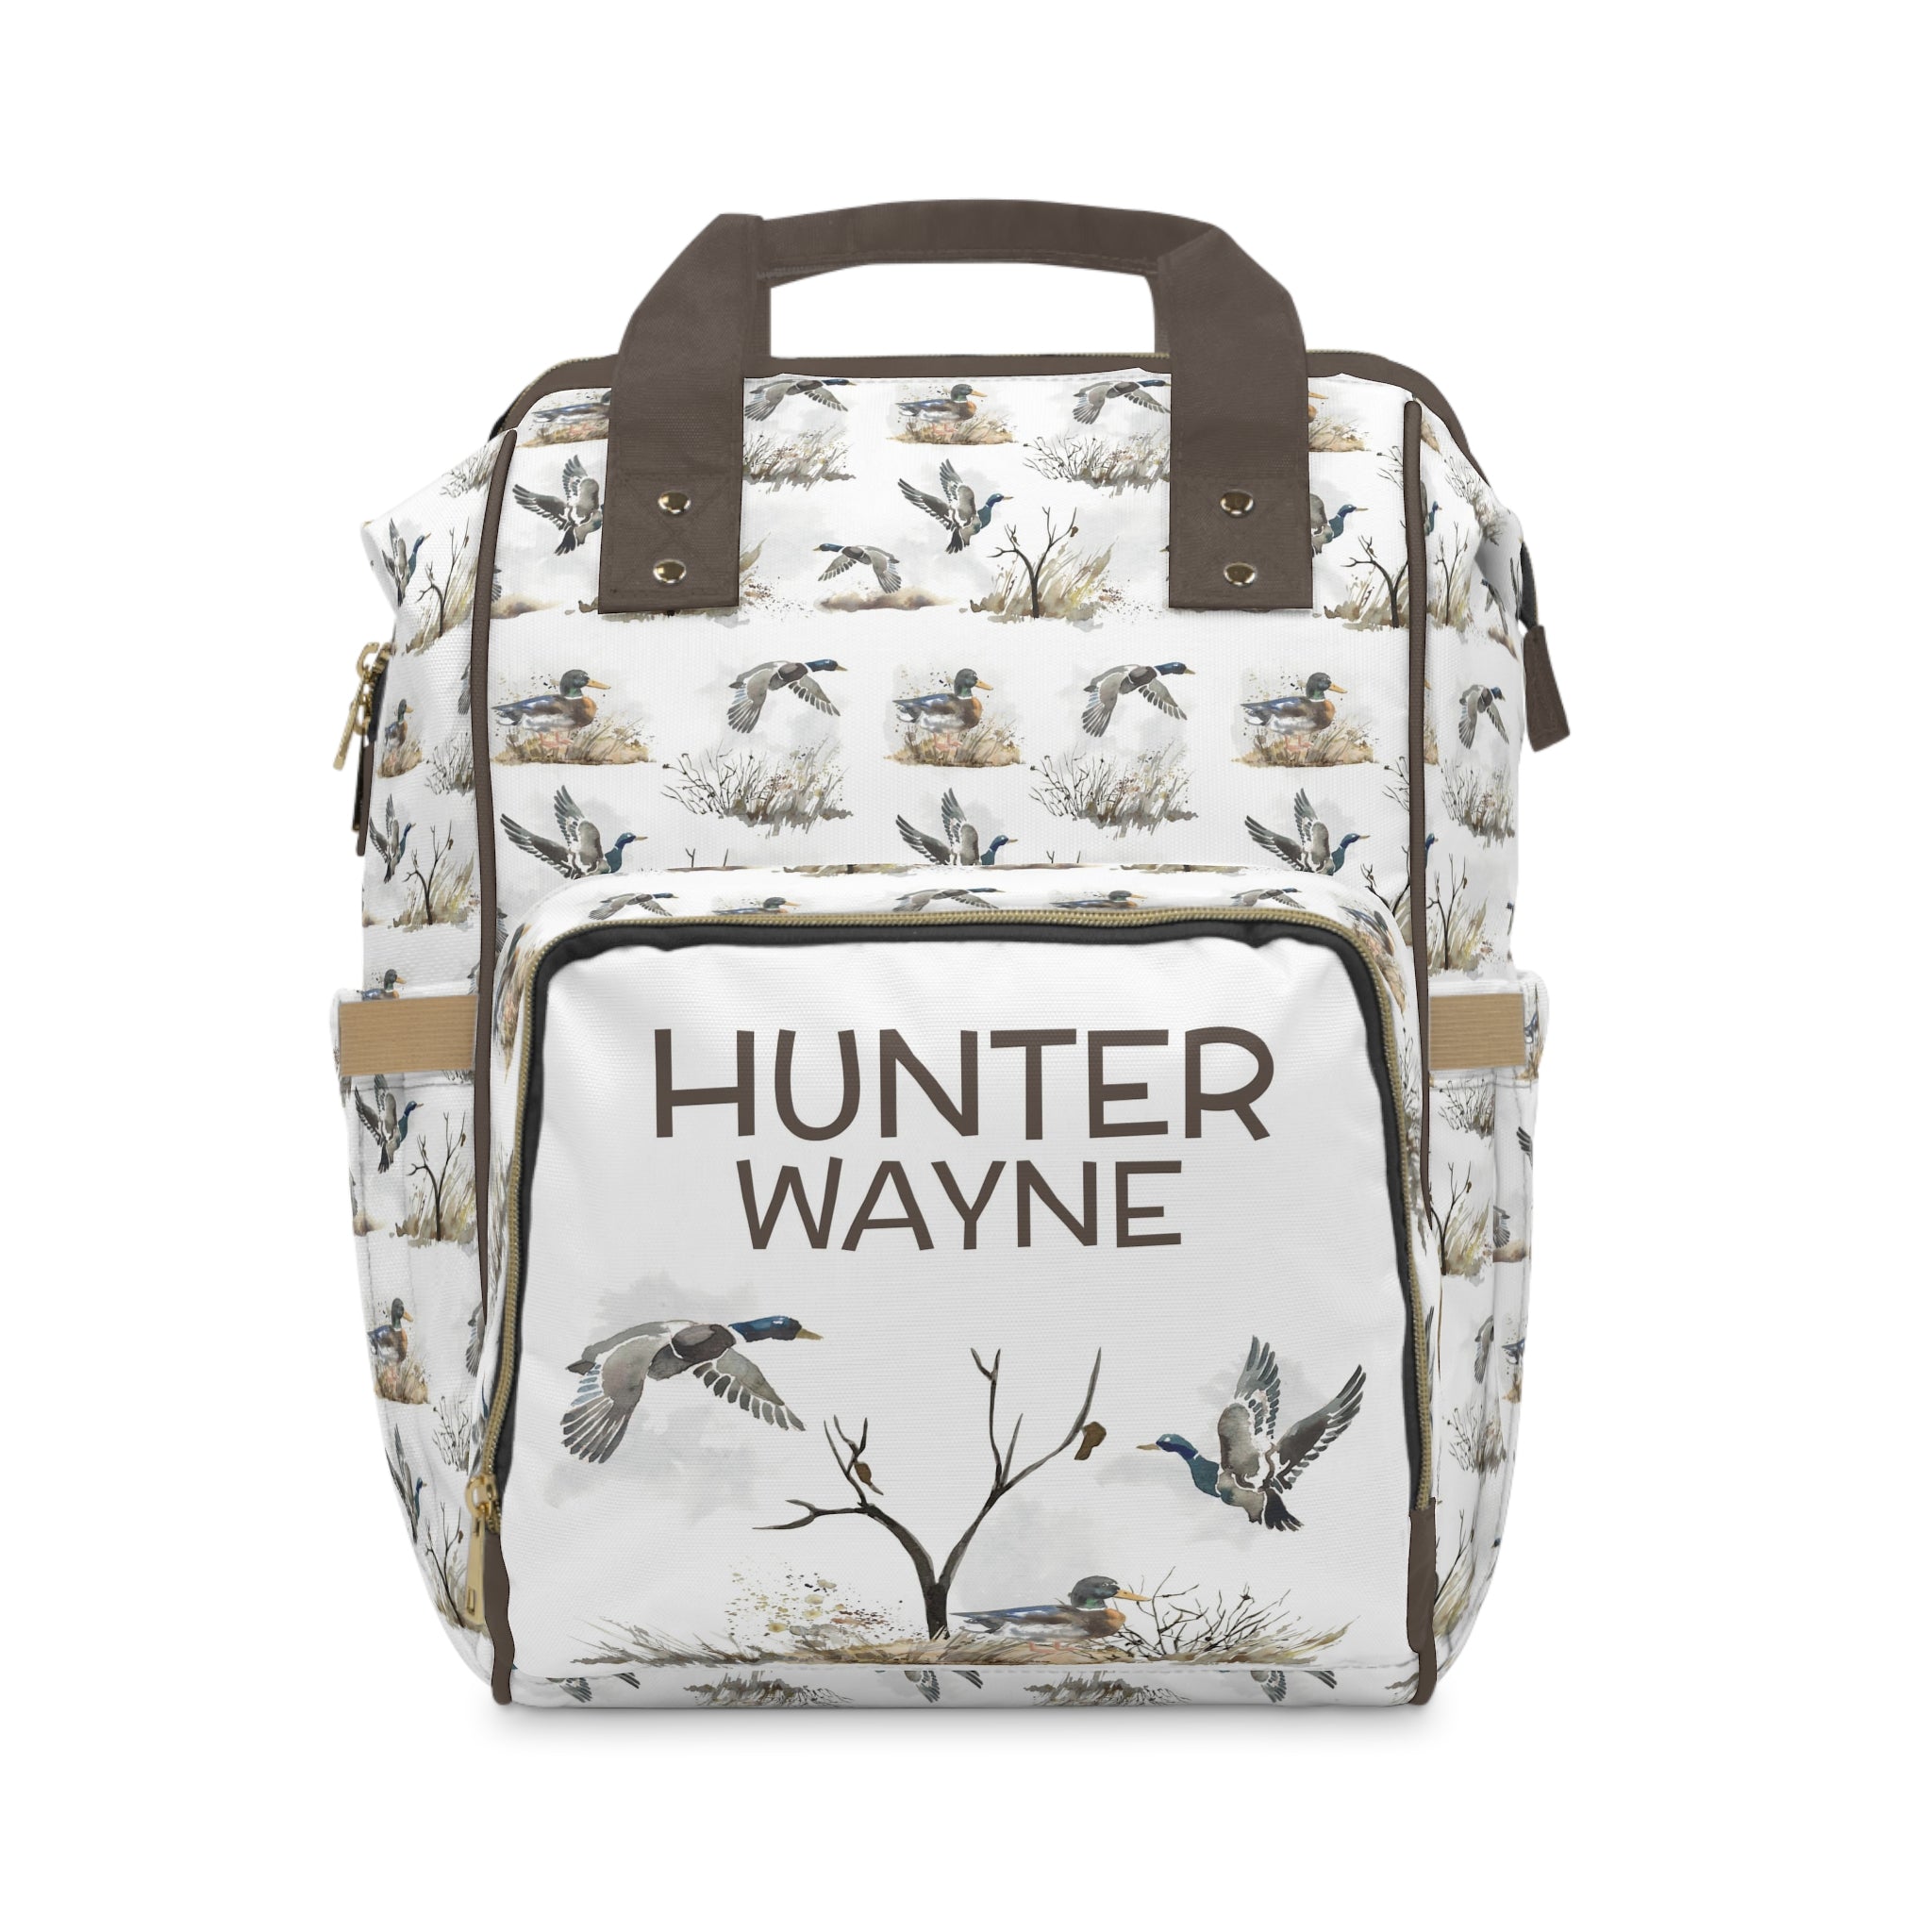 Amazon.com: HUNTER Los Angeles Carrier Bag, Taupe/Grey : Pet Supplies